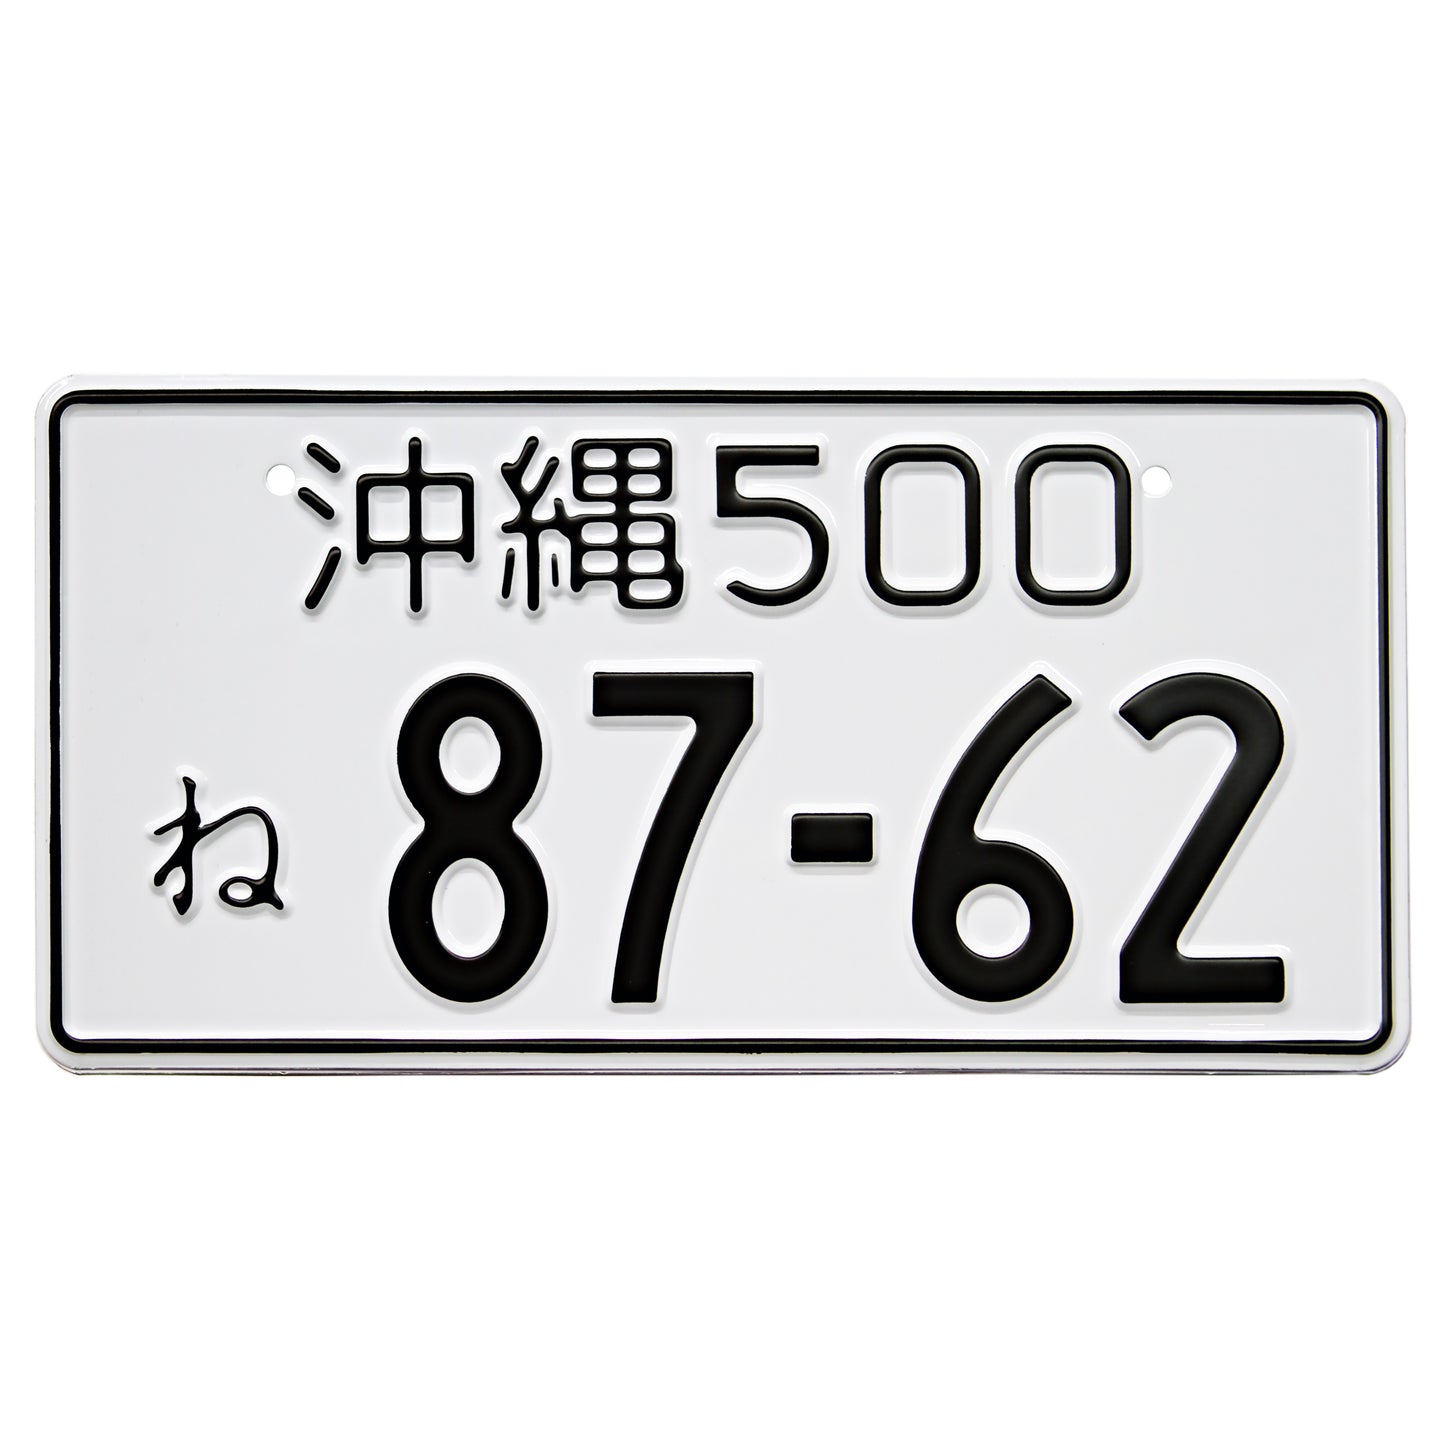 Japanese license plate gloss white with black text front view